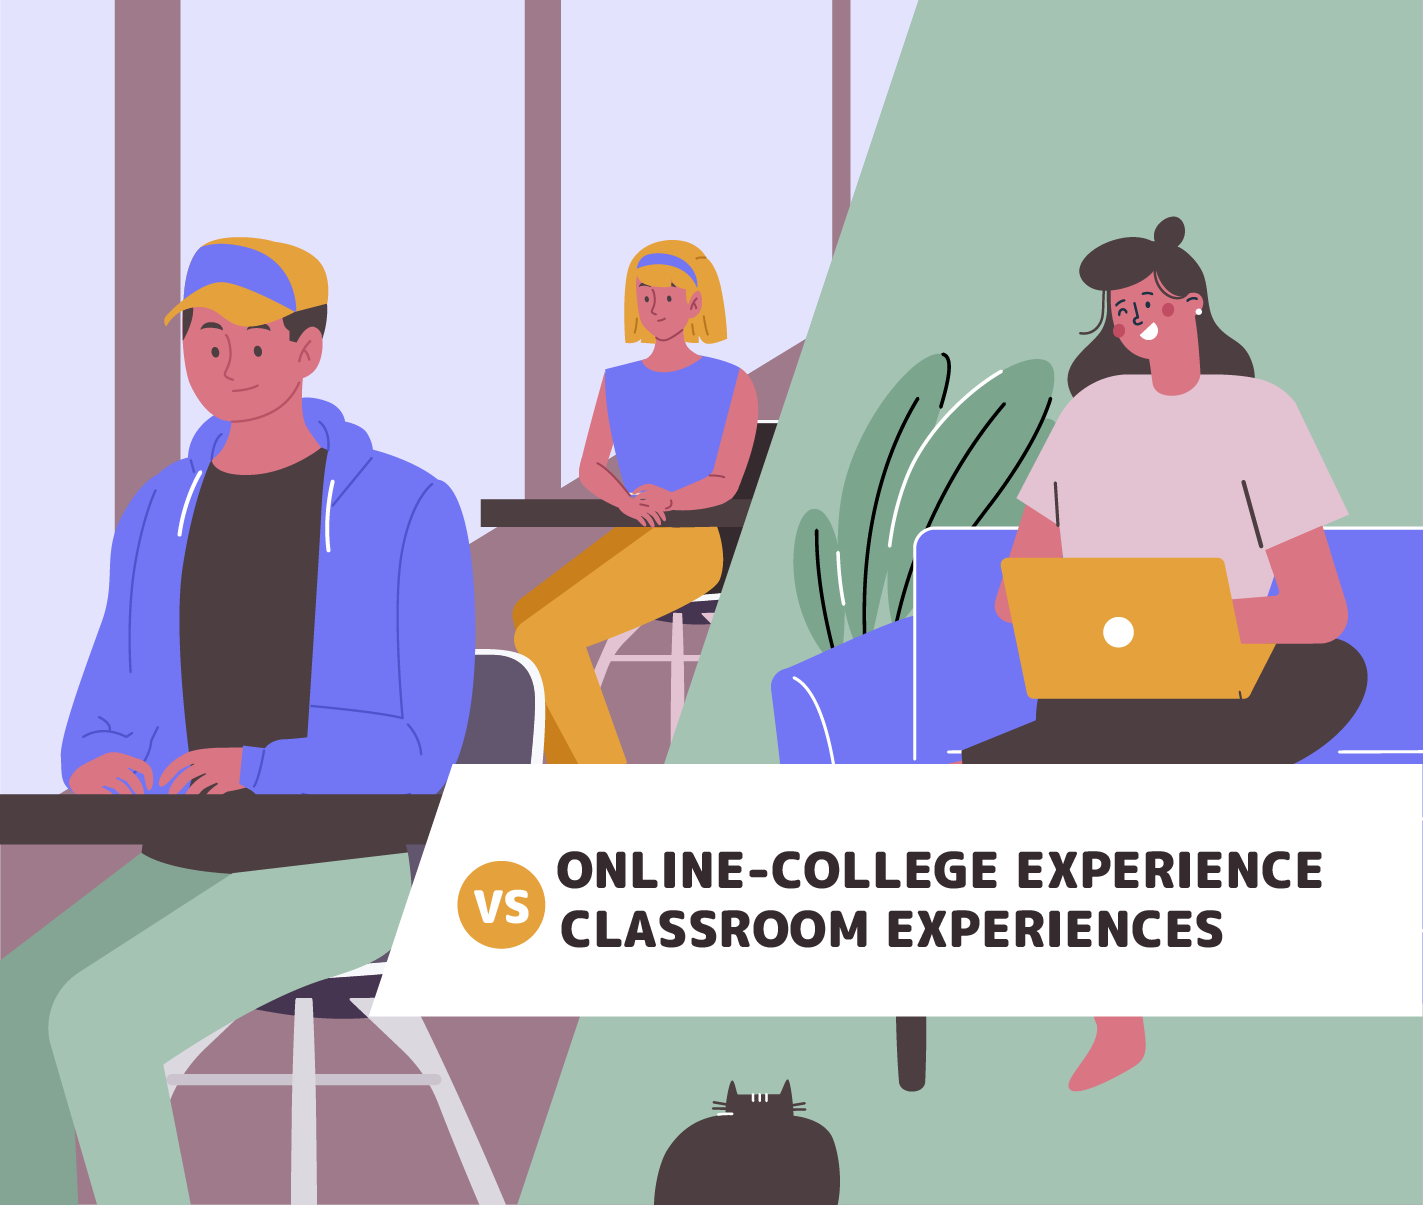 online-college experience vs classroom experiences